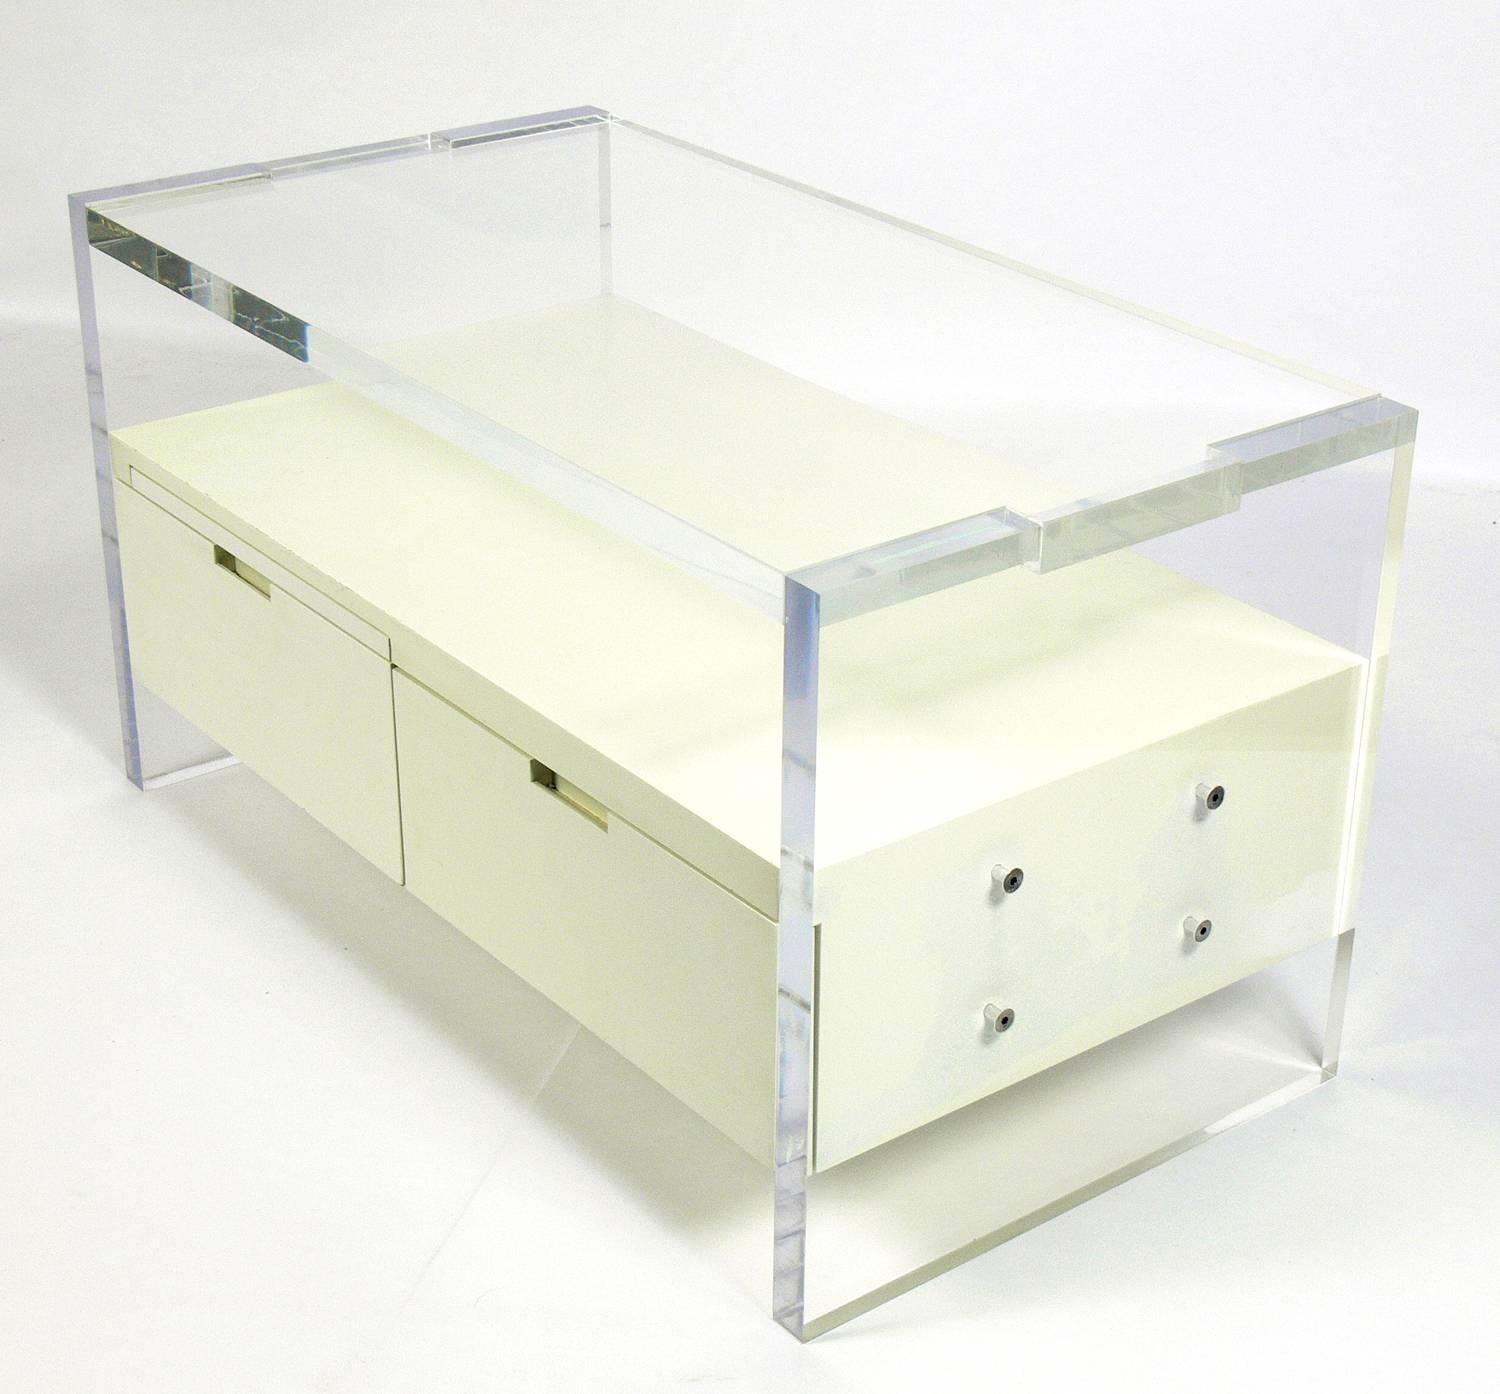 Pair of large-scale Lucite nightstands or end tables by Milo Baughman for Thayer Coggin, American, circa 1970s. They are constructed of thick Lucite slabs and white lacquered wood. The white lacquered finish has mellowed to a warm ivory color with